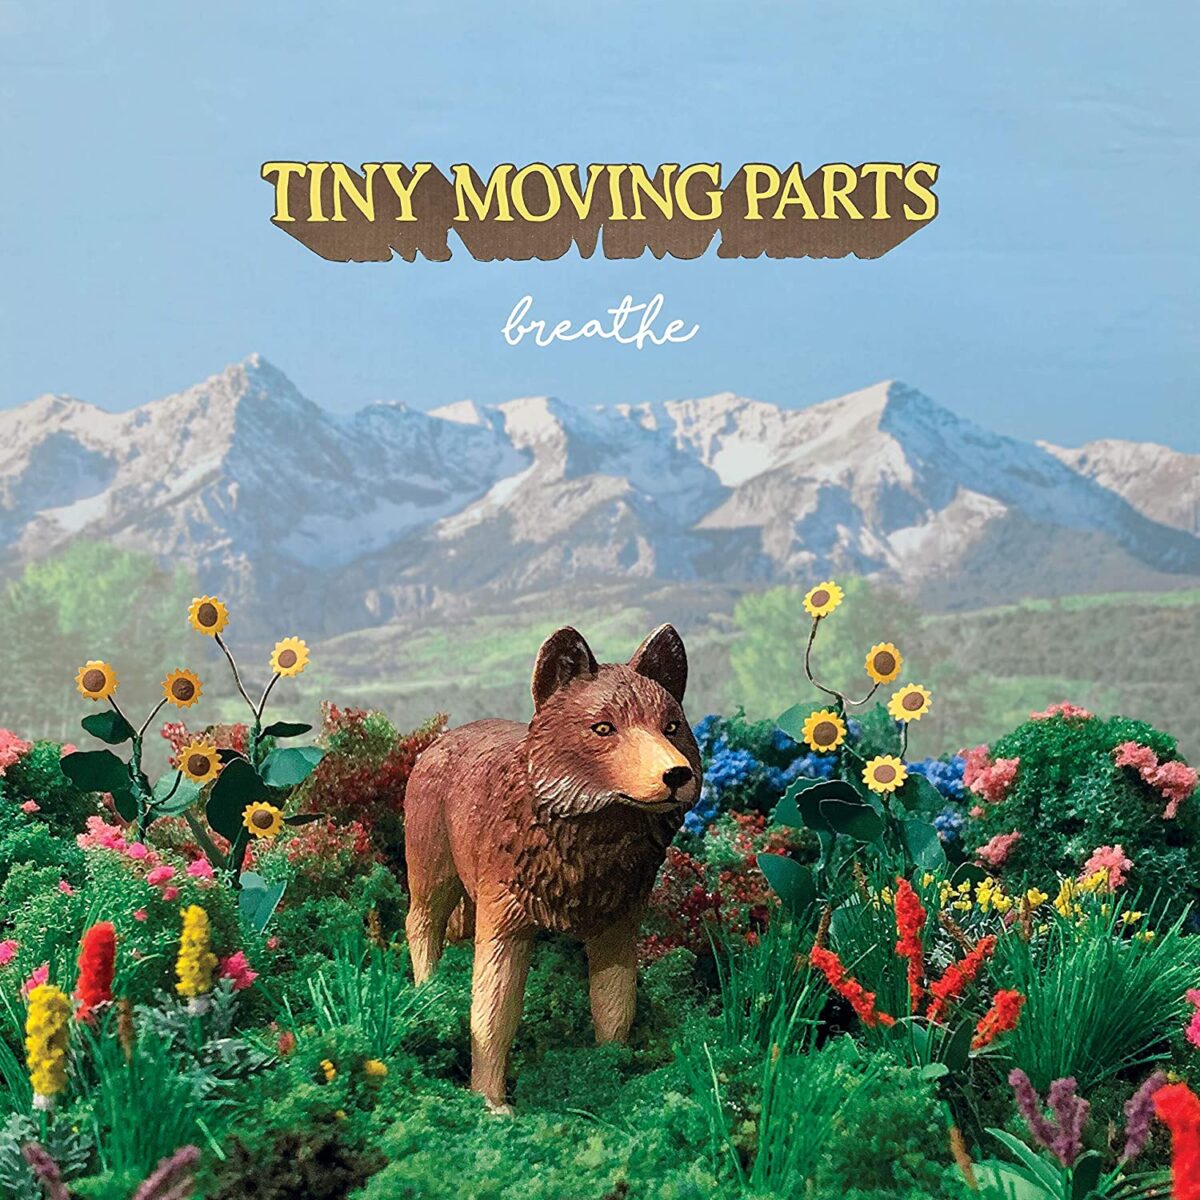 "breathe"'s album cover depicts the painted statue of a wolf standing in the middle of nature, surrounded by red and yellow flowers. There are mountains and a big blue sky behind it and "Tiny Moving Parts" is in yellow with brown outlines, in all caps.